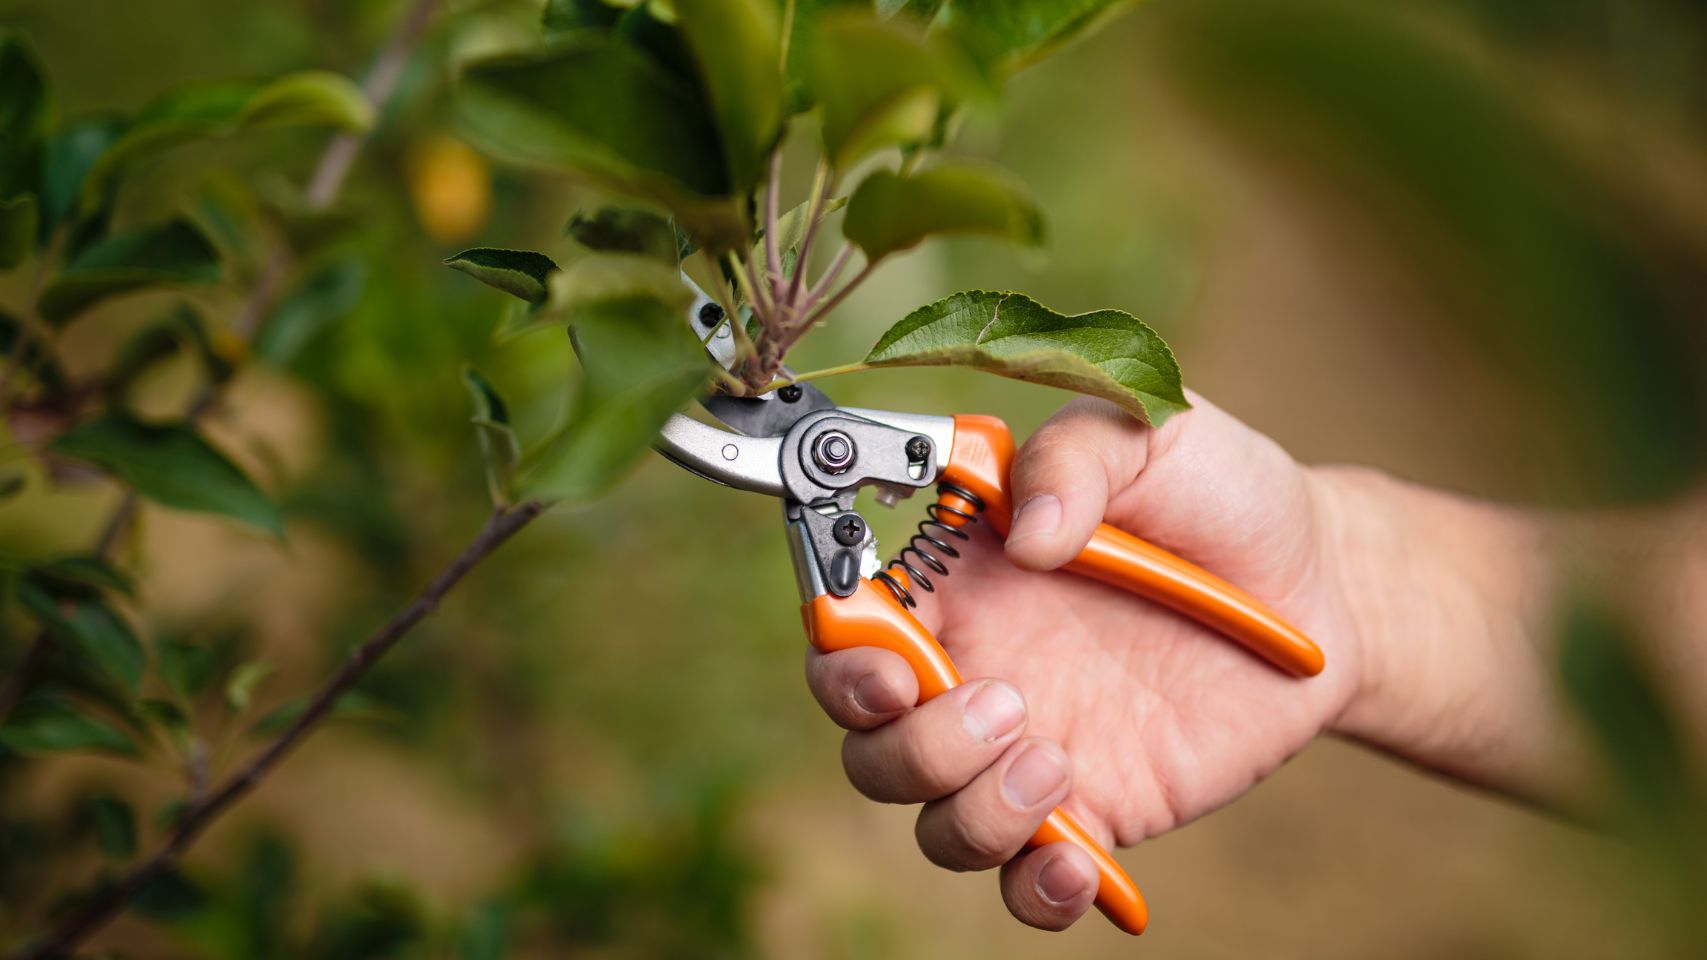 Prune Your Business to Make it Grow